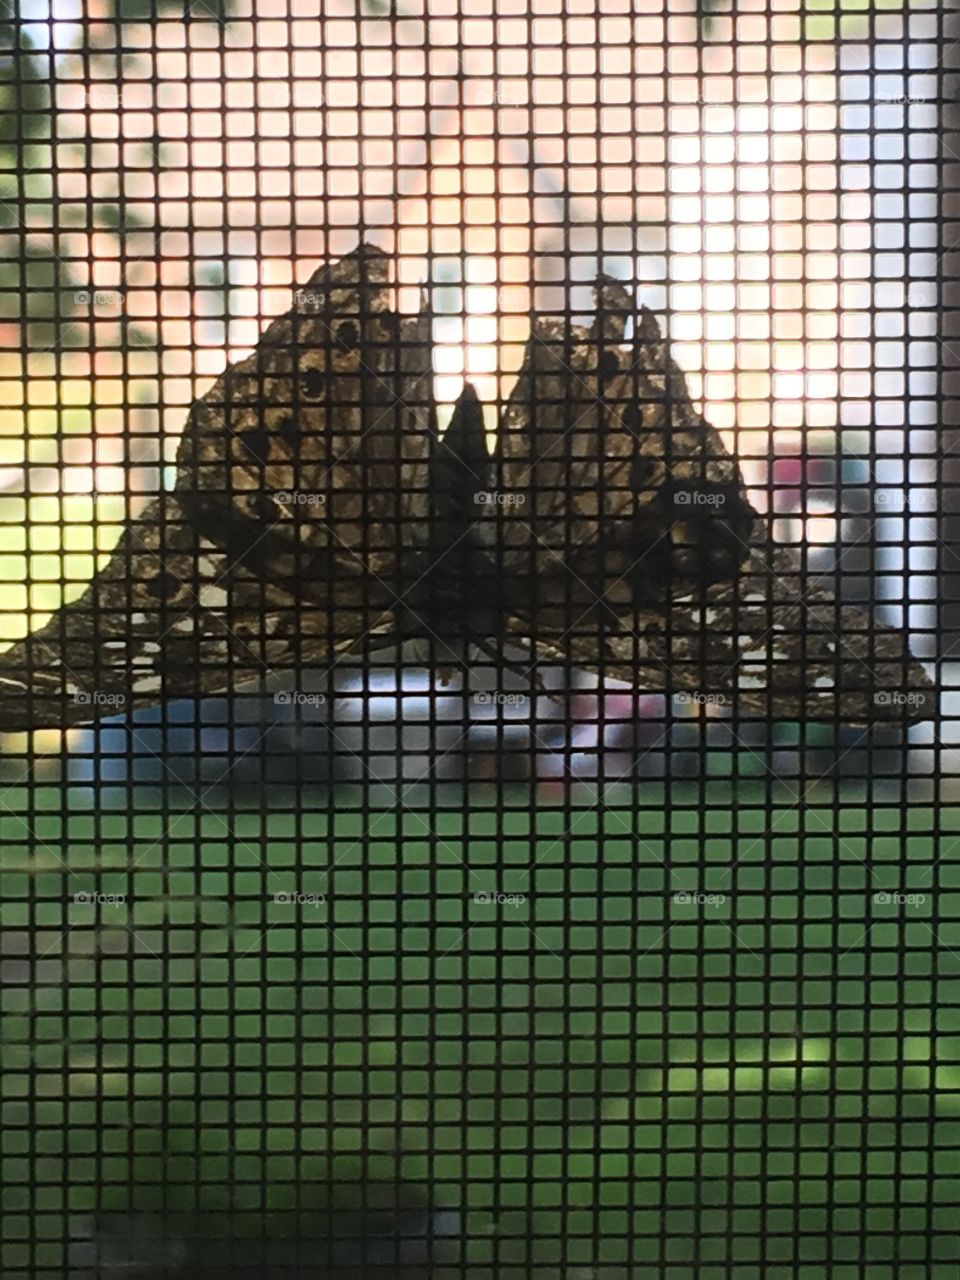 Butterfly on my window, took pic just in time before it flew away! Upside down.